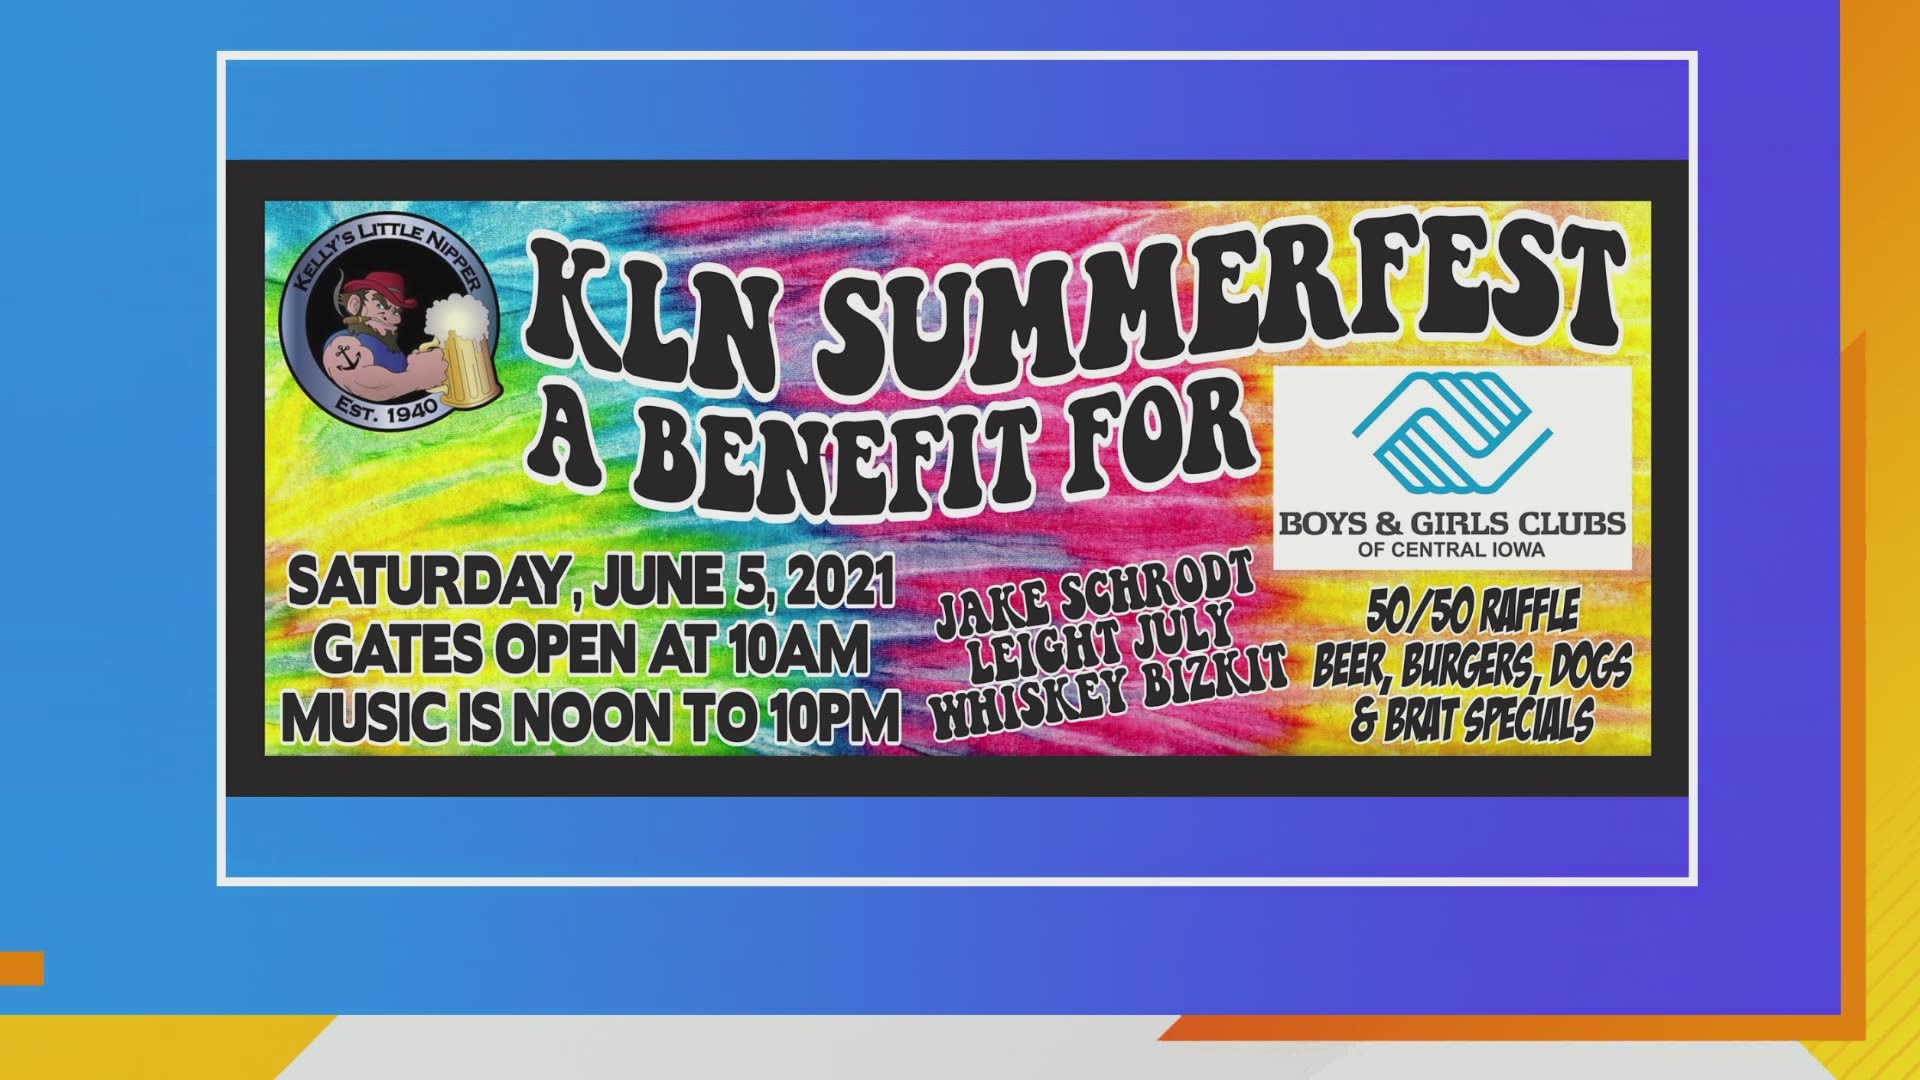 KLN Summerfest to benefit the Boys and Girls Clubs of Central Iowa is an all day/night affair at Kelly's Little Nipper at East 17th & Grand happening SATURDAY June 5